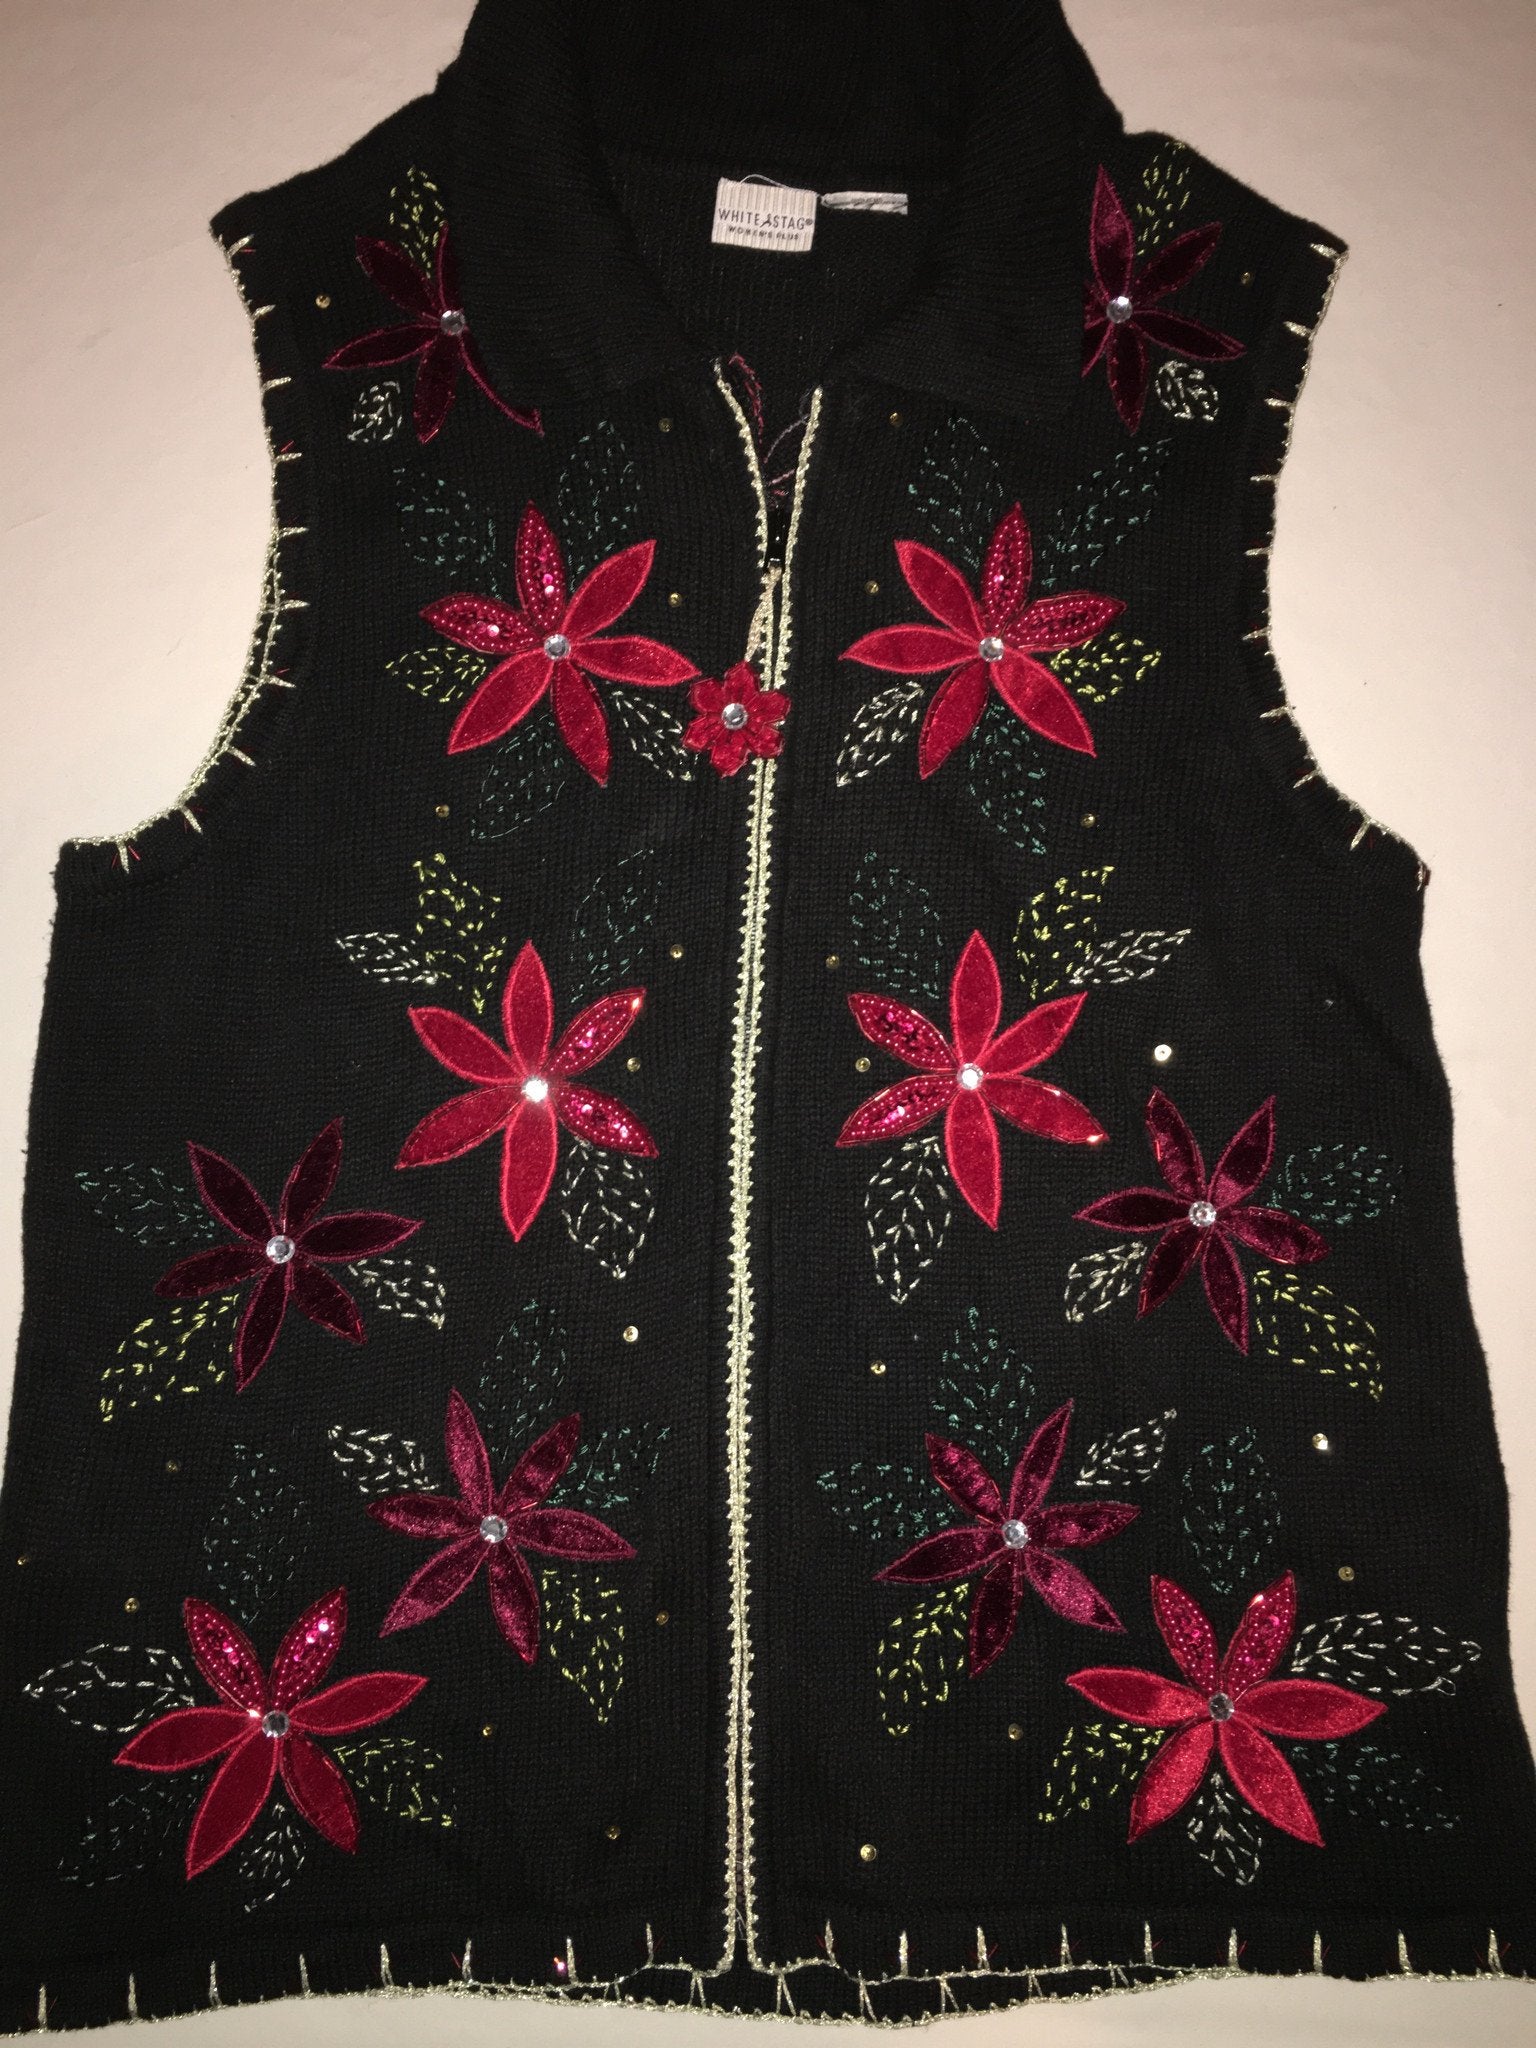 Get To The Poinsettia Ugly Xmas Vest 9021